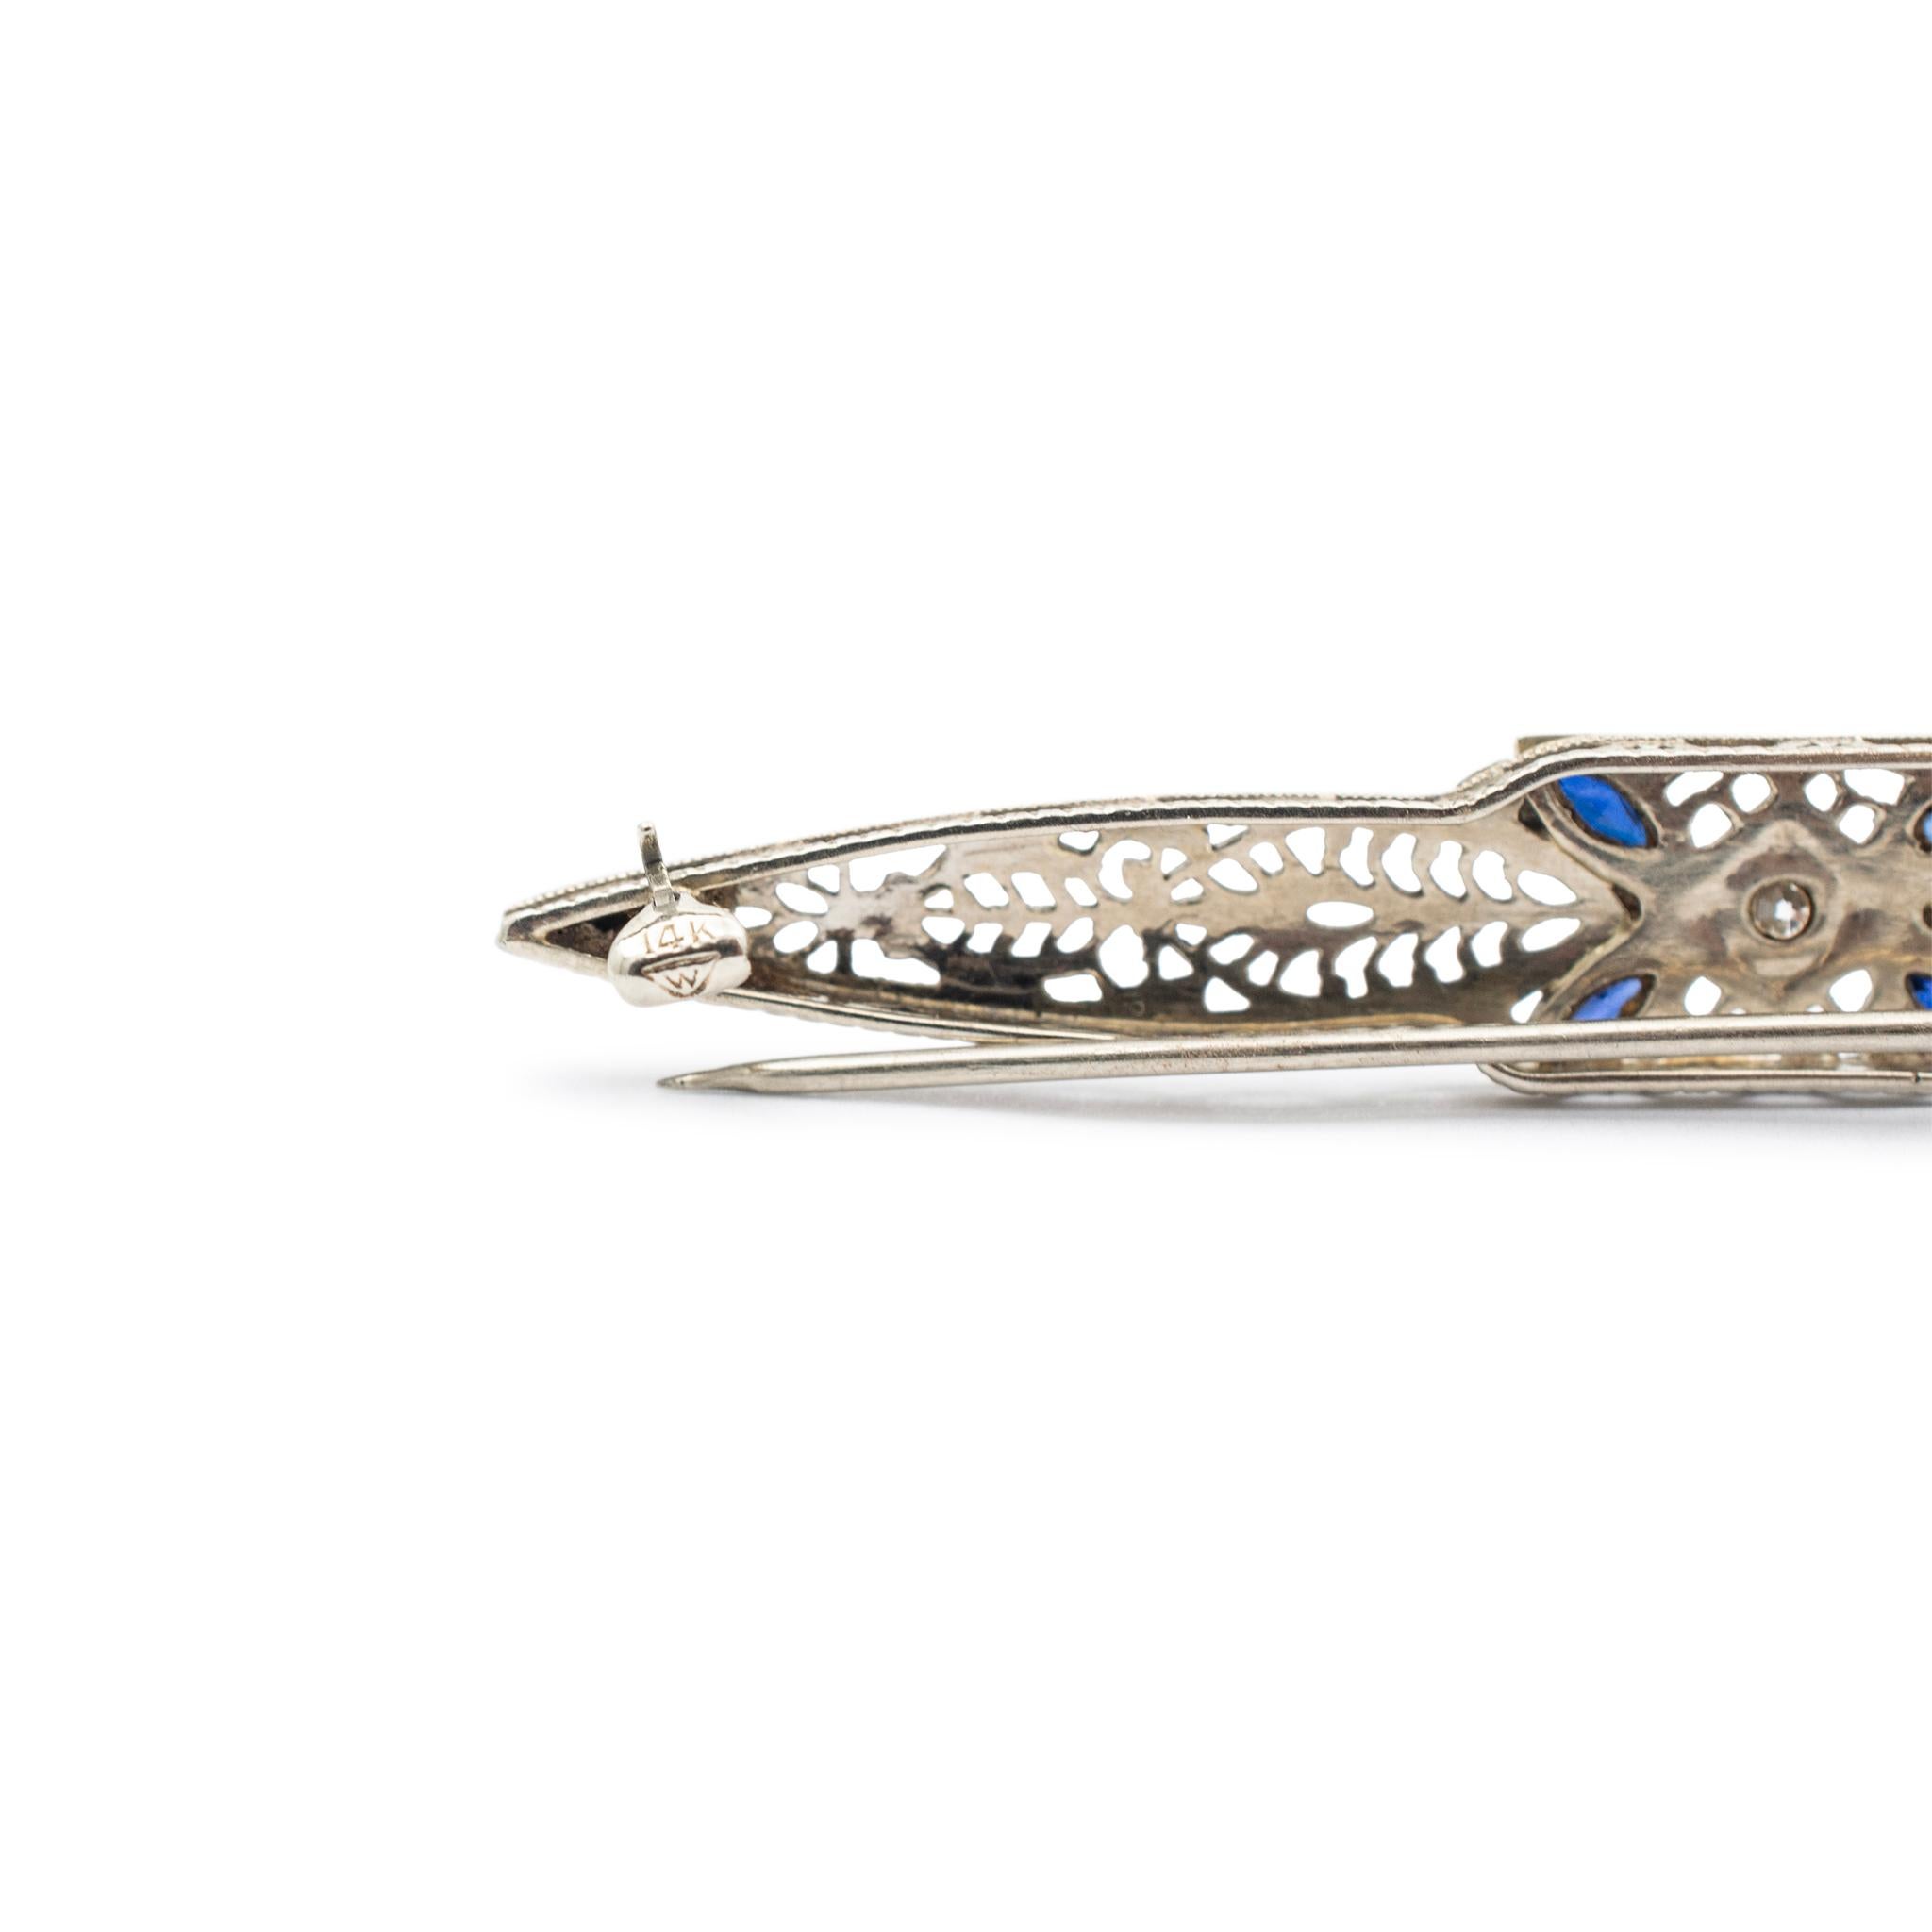 Antique Art Deco 14K White Gold Filigreed Diamond Sapphires Brooch In Excellent Condition For Sale In Houston, TX